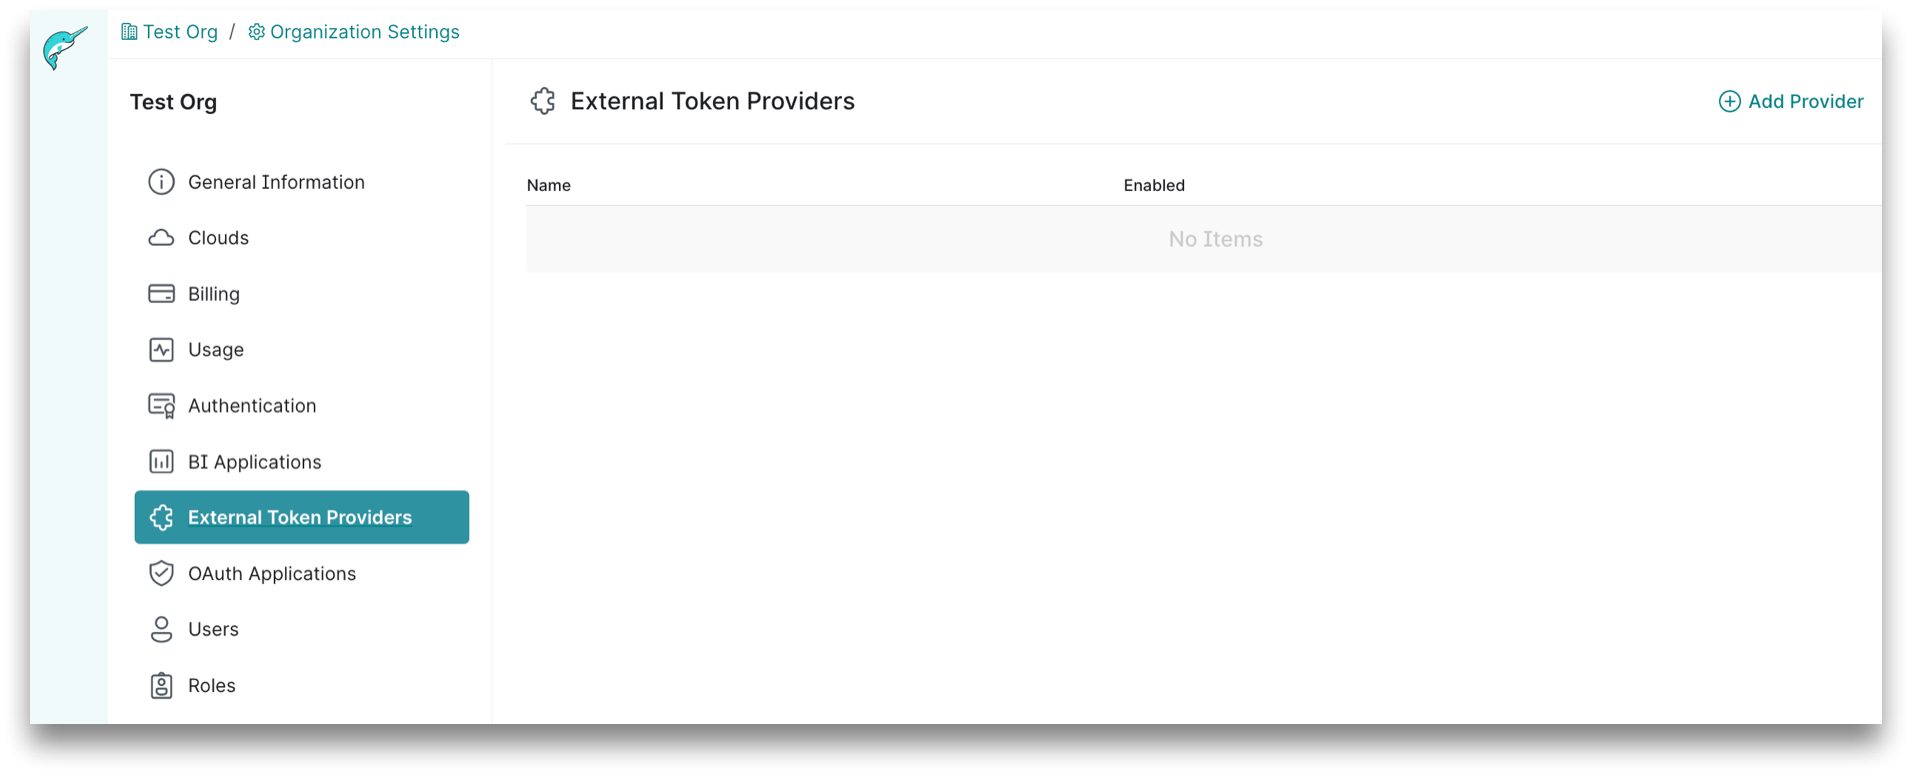 This is a screenshot showing the External Token Providers page.